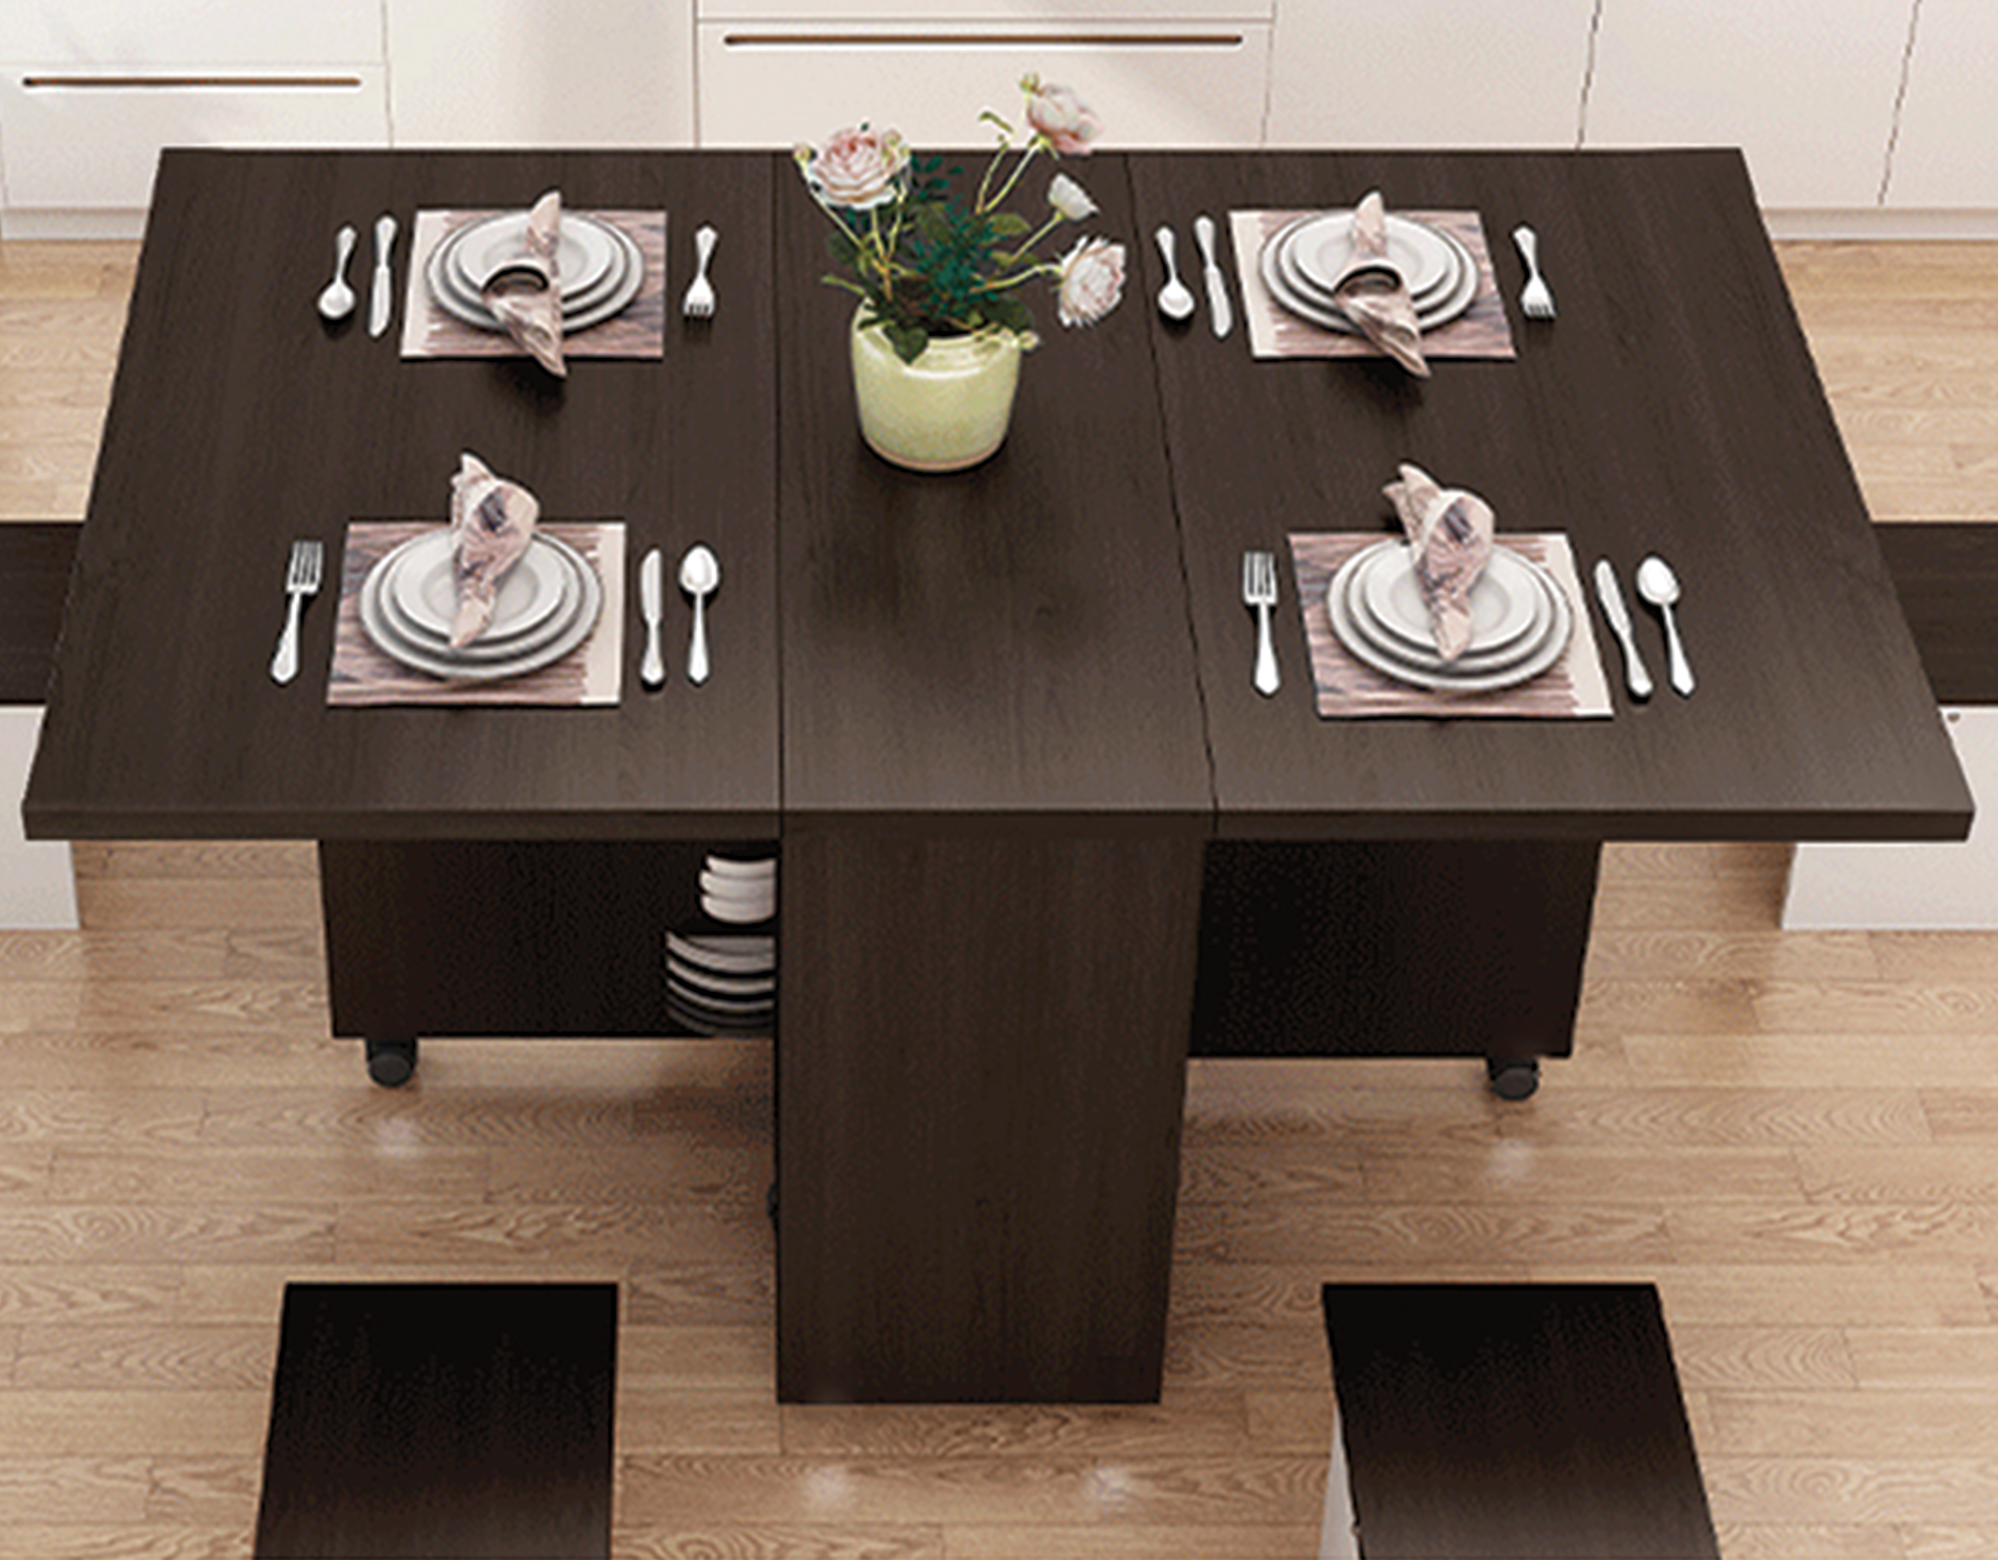 DINNING TABLE